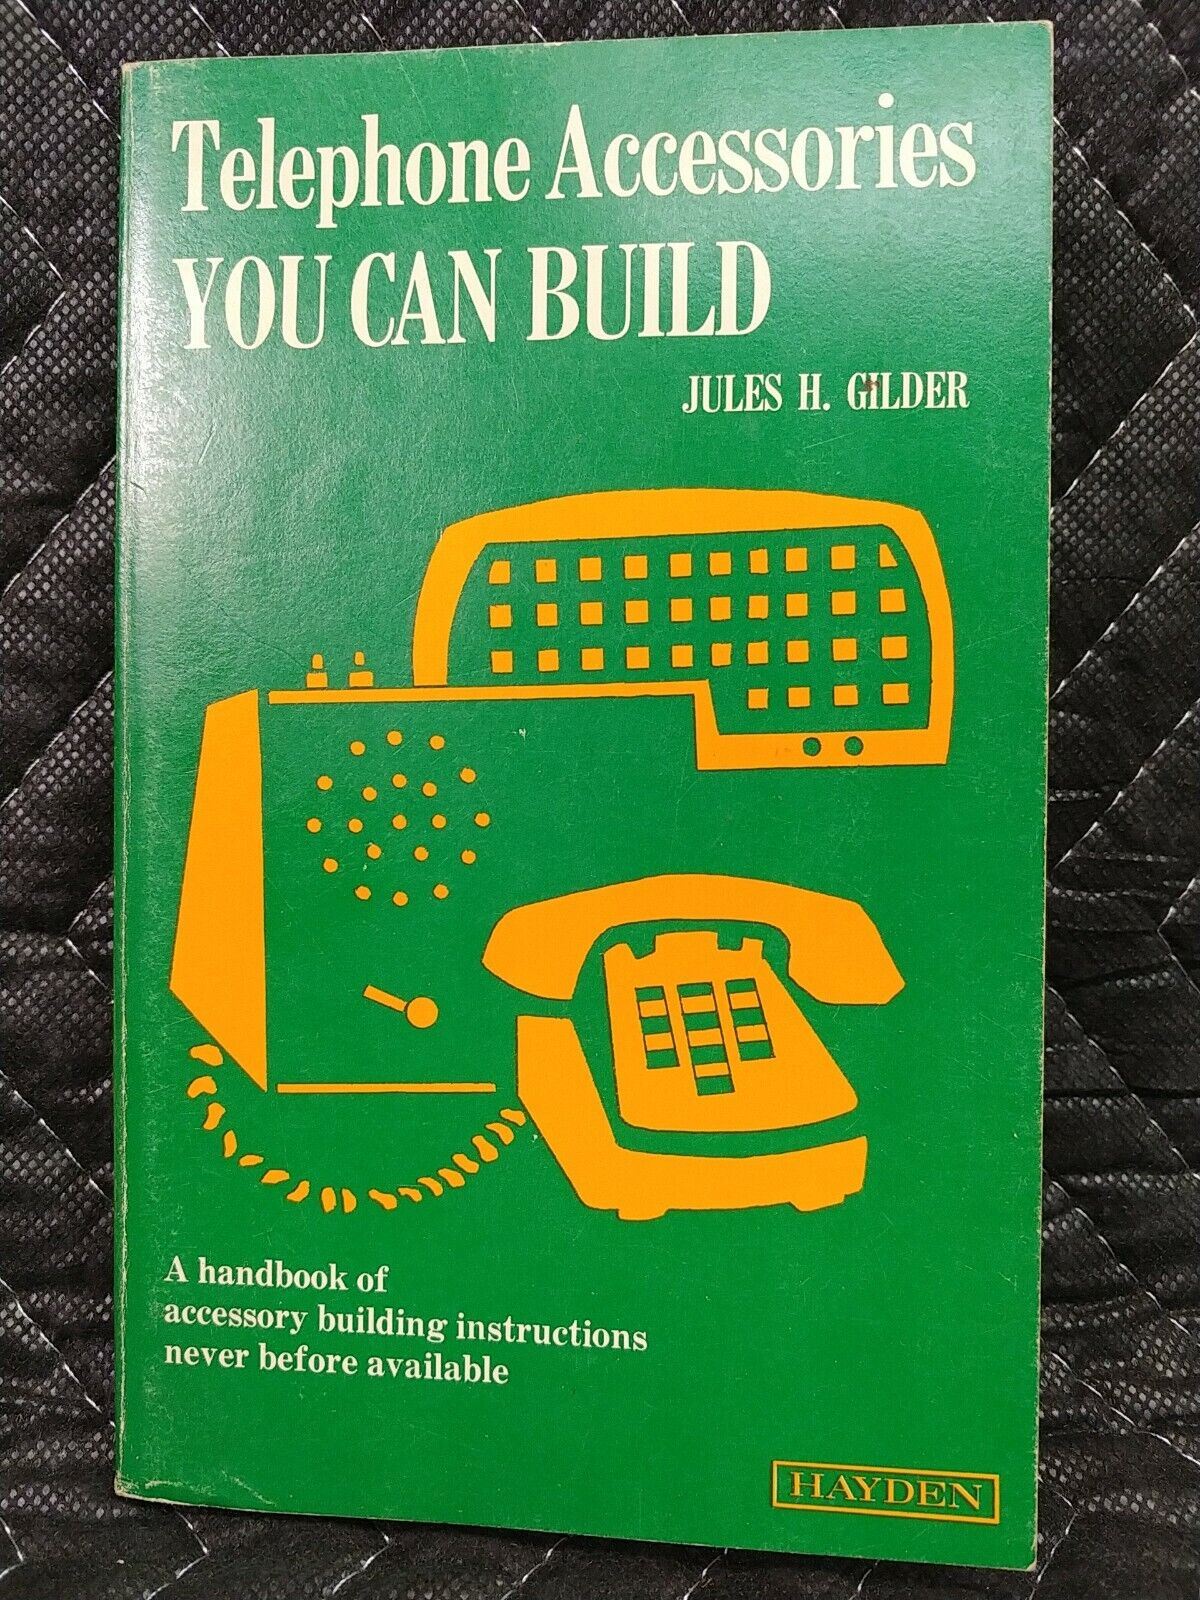 Telephone Accessories You Can Build by Jules H. Gilder